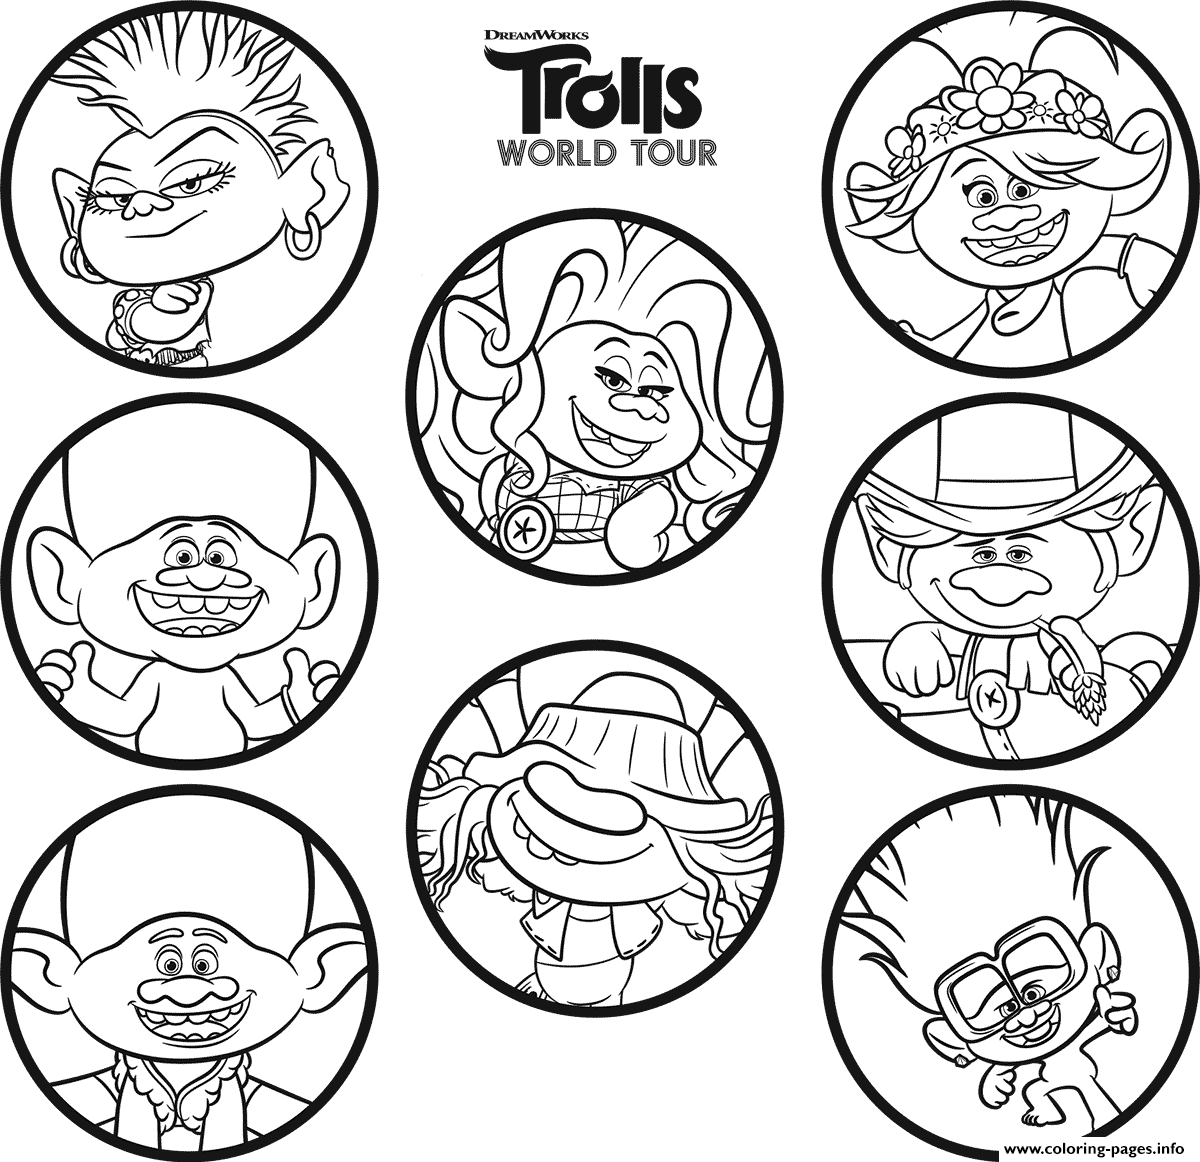 Print trolls world tour disney coloring pages coloring pages poppy coloring page disney coloring pages